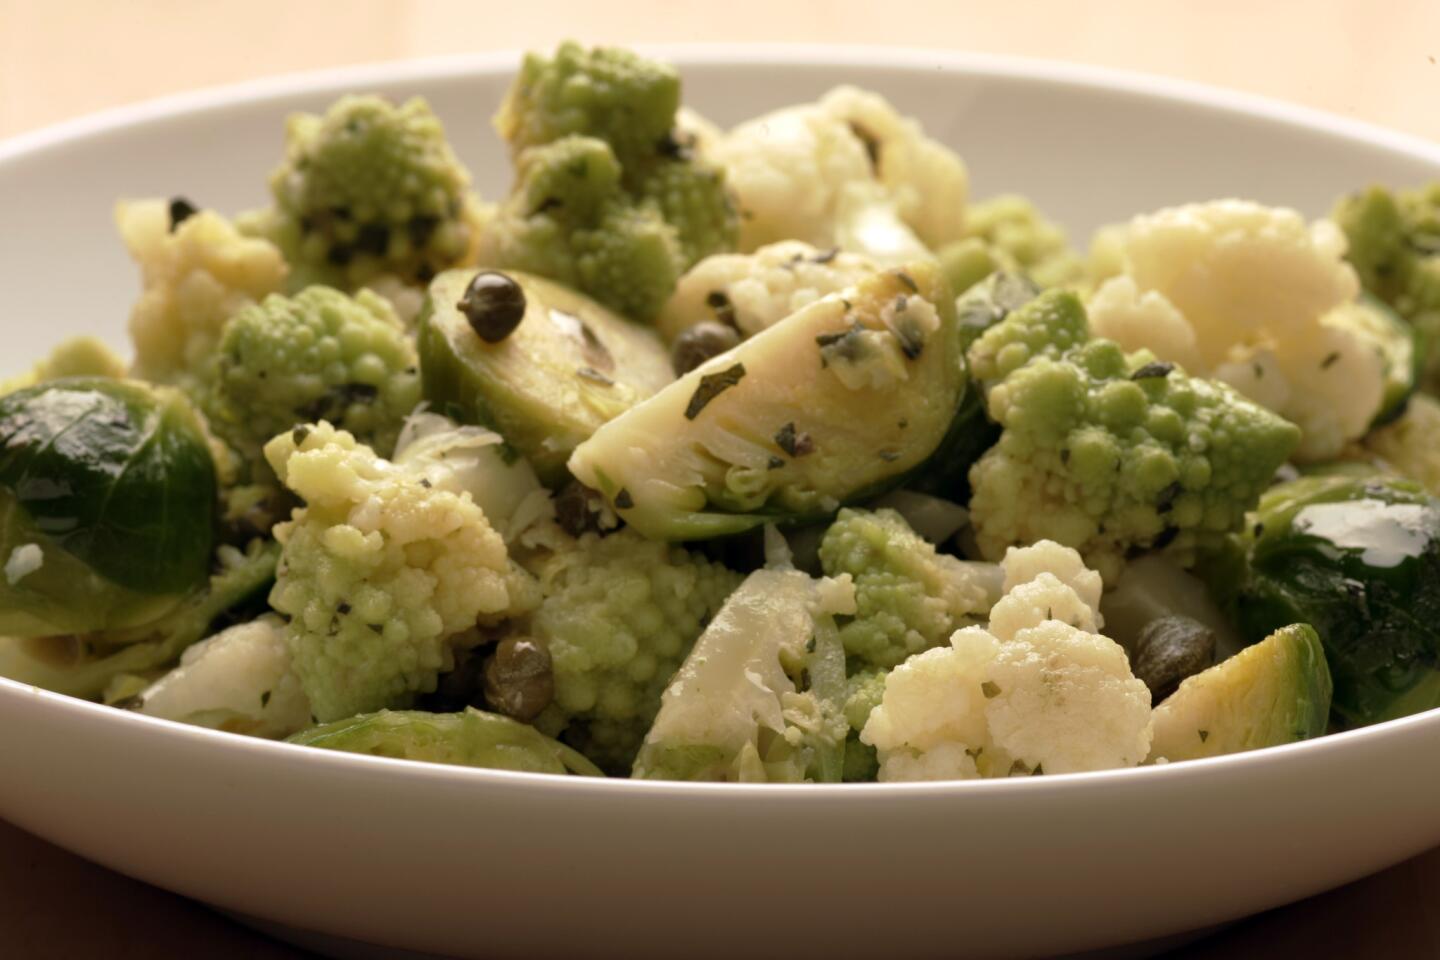 Cauliflower and Brussels sprouts salad with mustard-caper butter